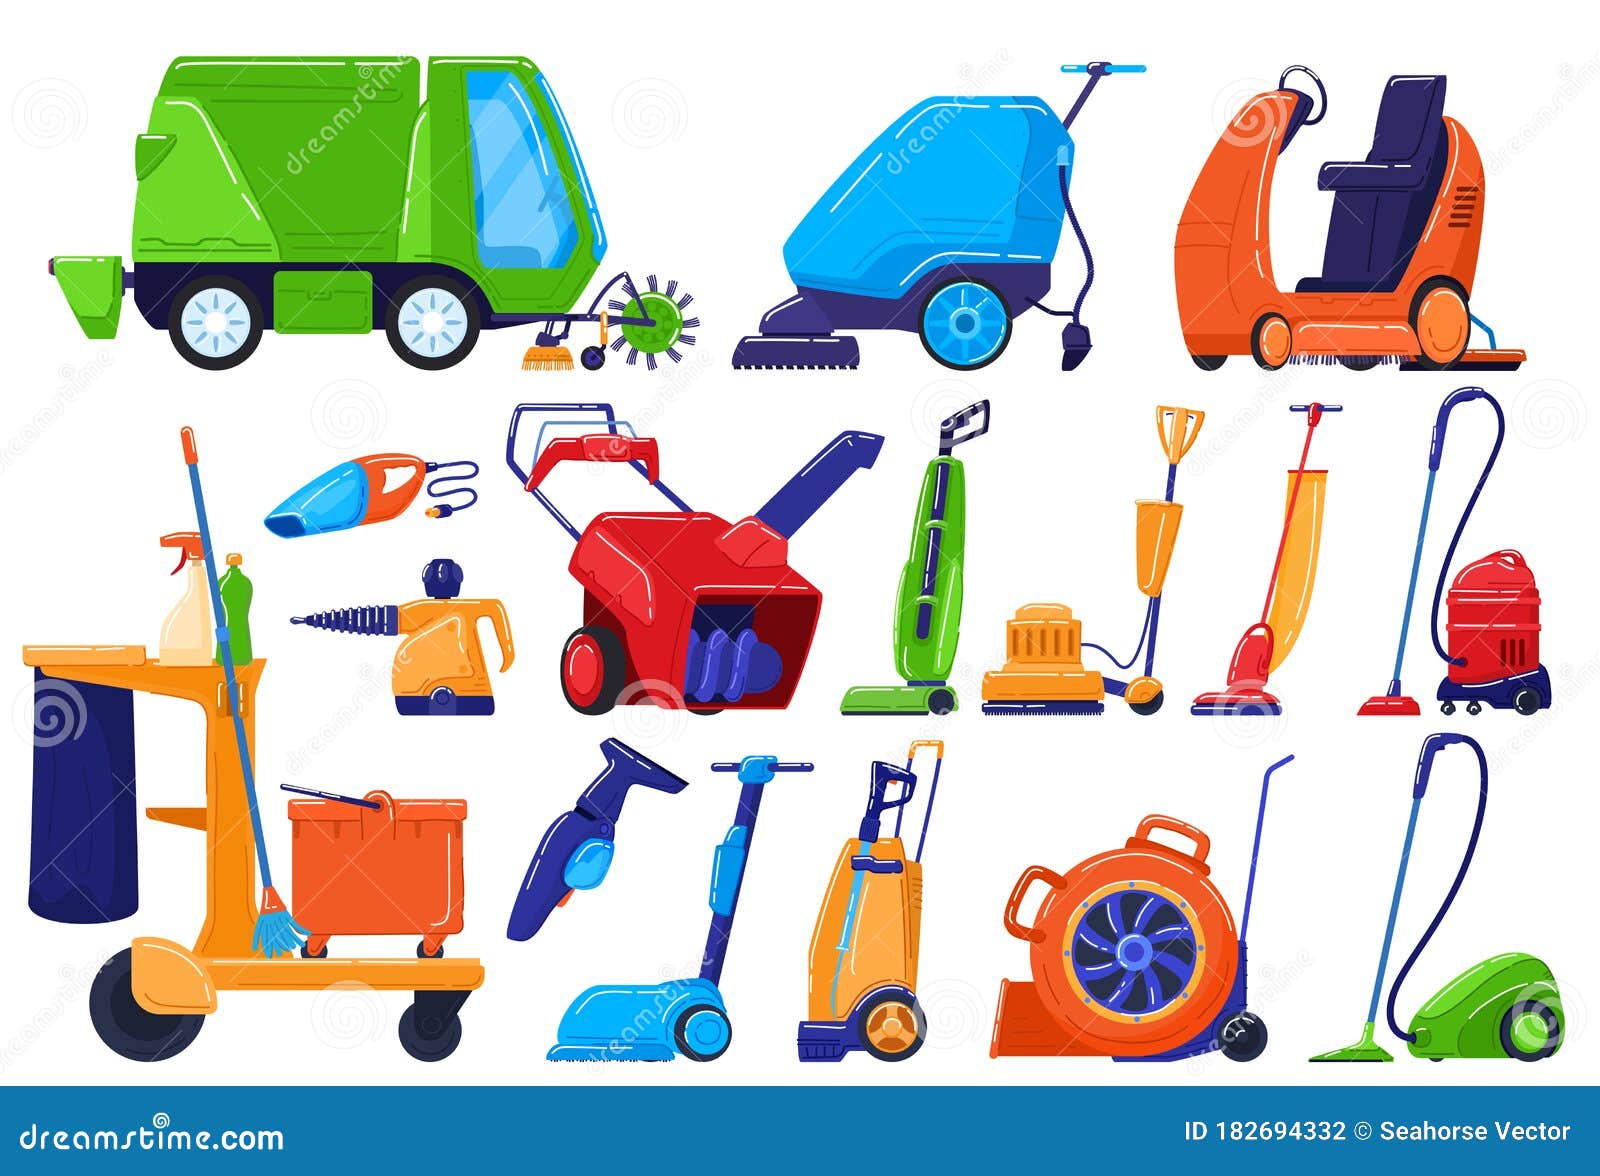 Cleaning tools isolated house washing equipment Vector Image